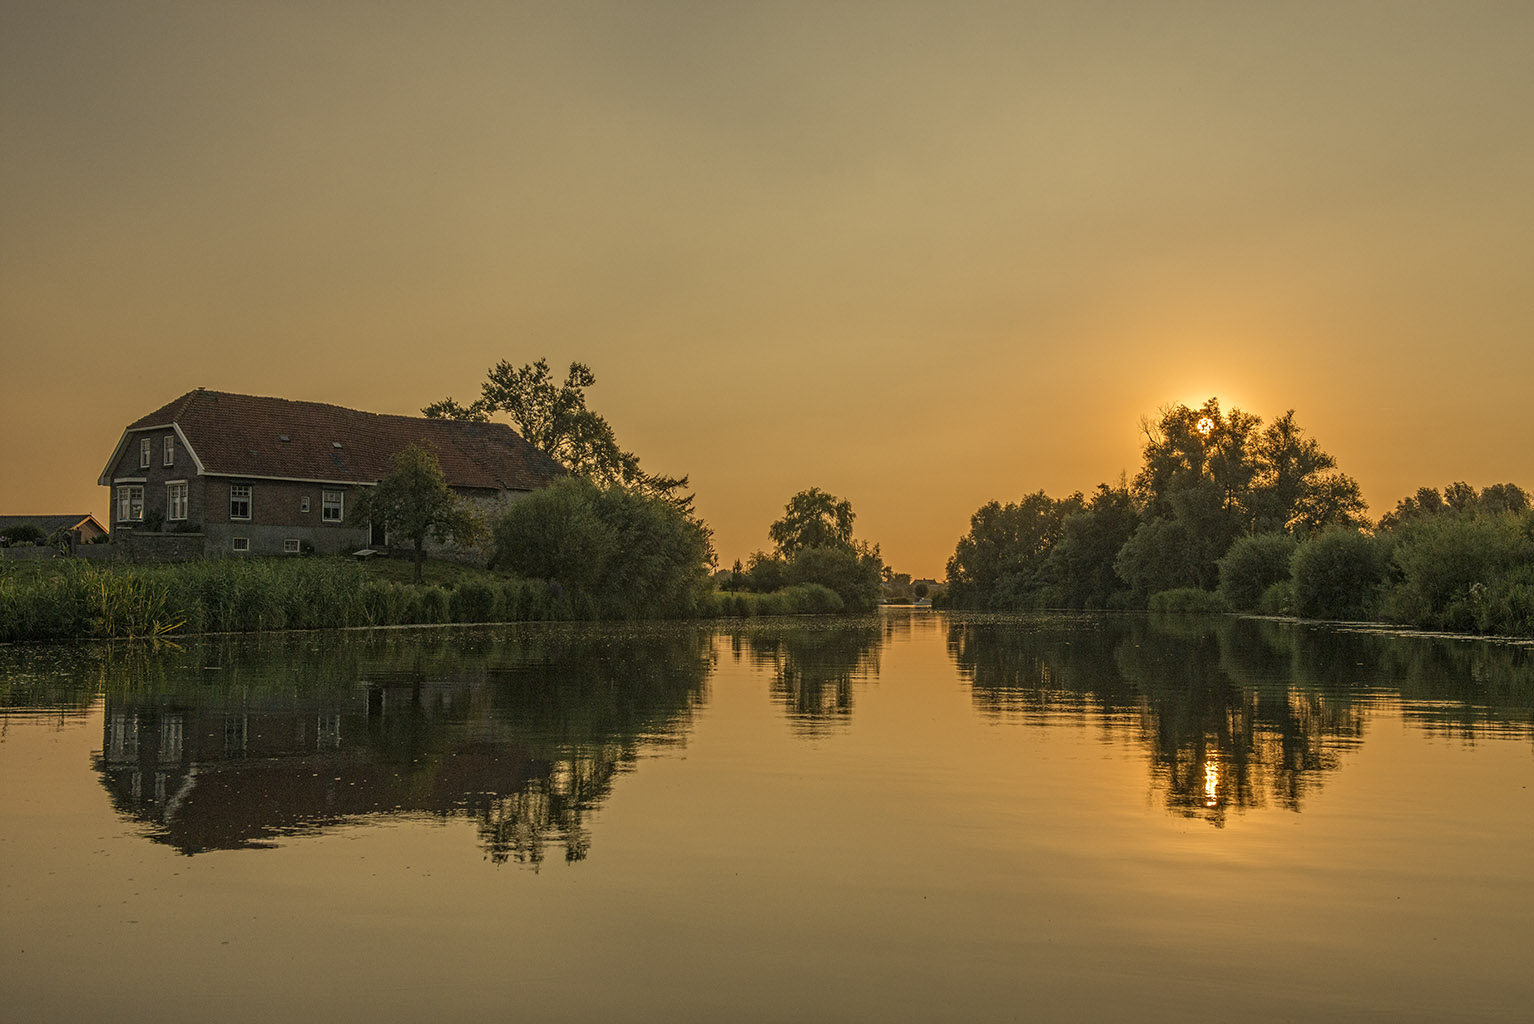 Around the Linge river, The Netherlands